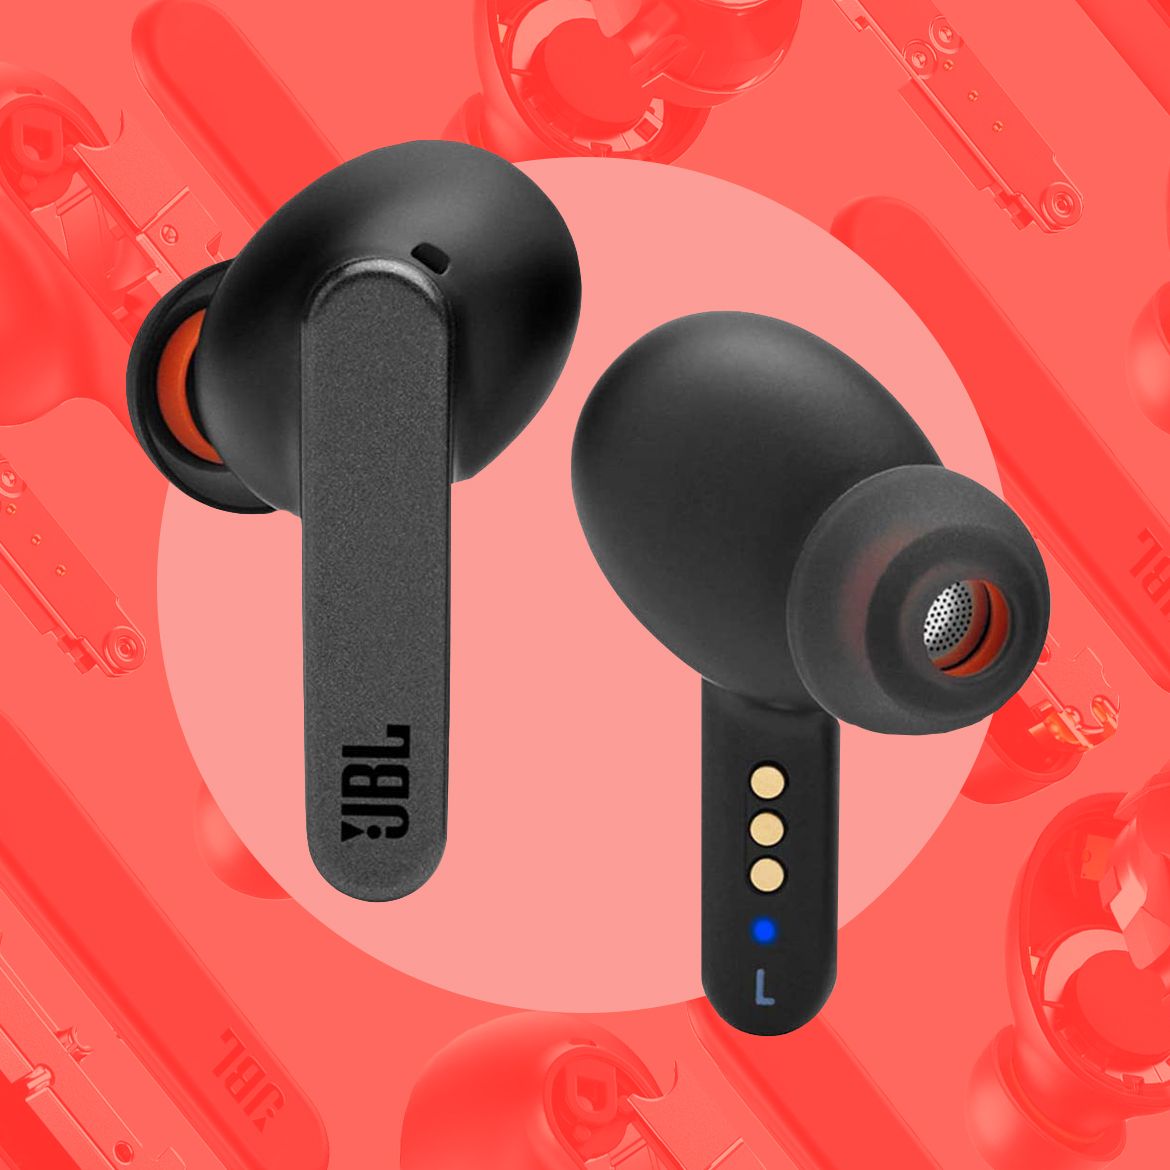 JBL Live Pro 2 Truly Wireless Earphones With ANC, 40-Hour Battery